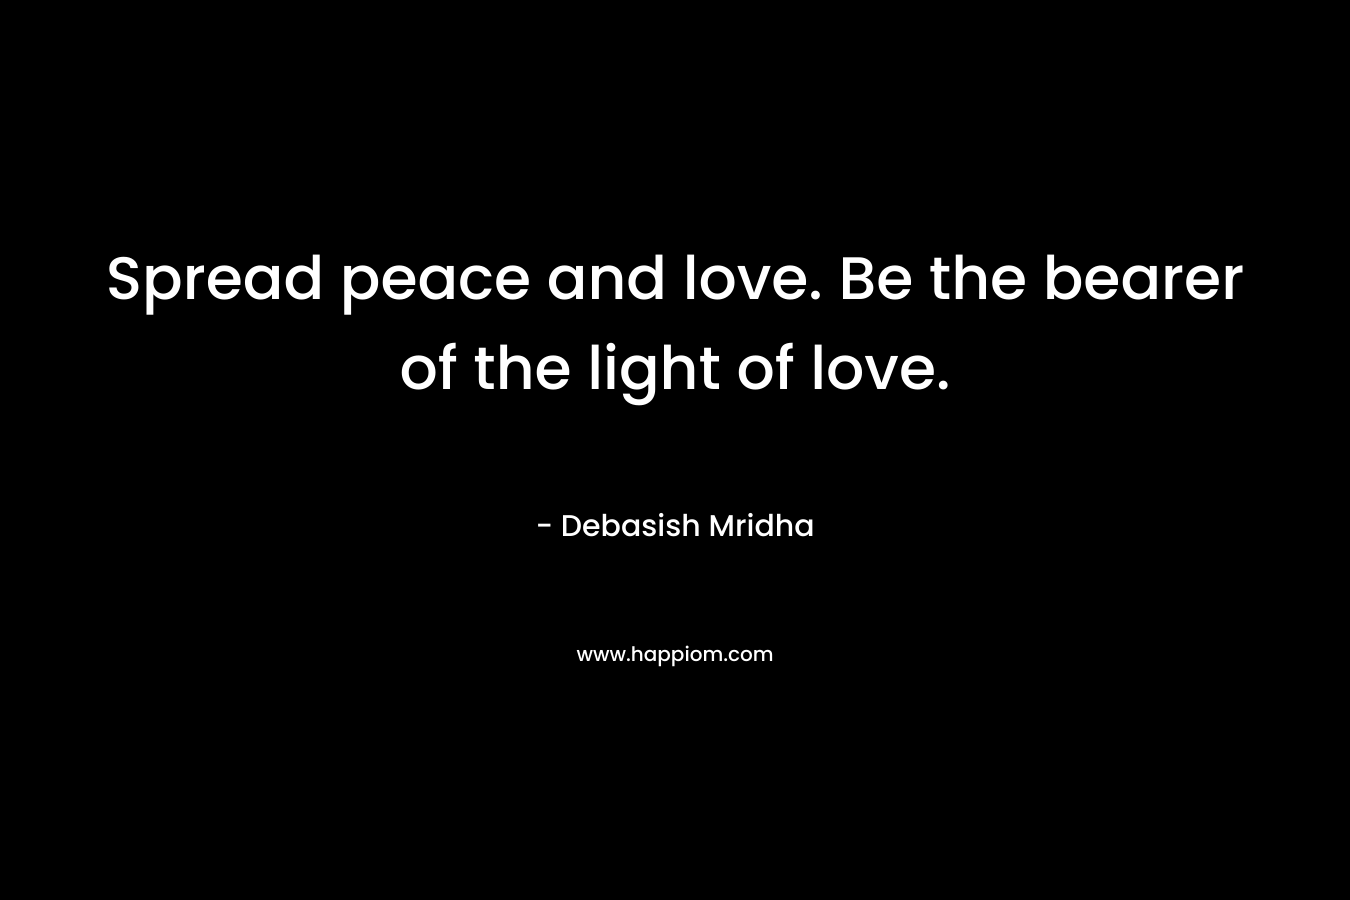 Spread peace and love. Be the bearer of the light of love.